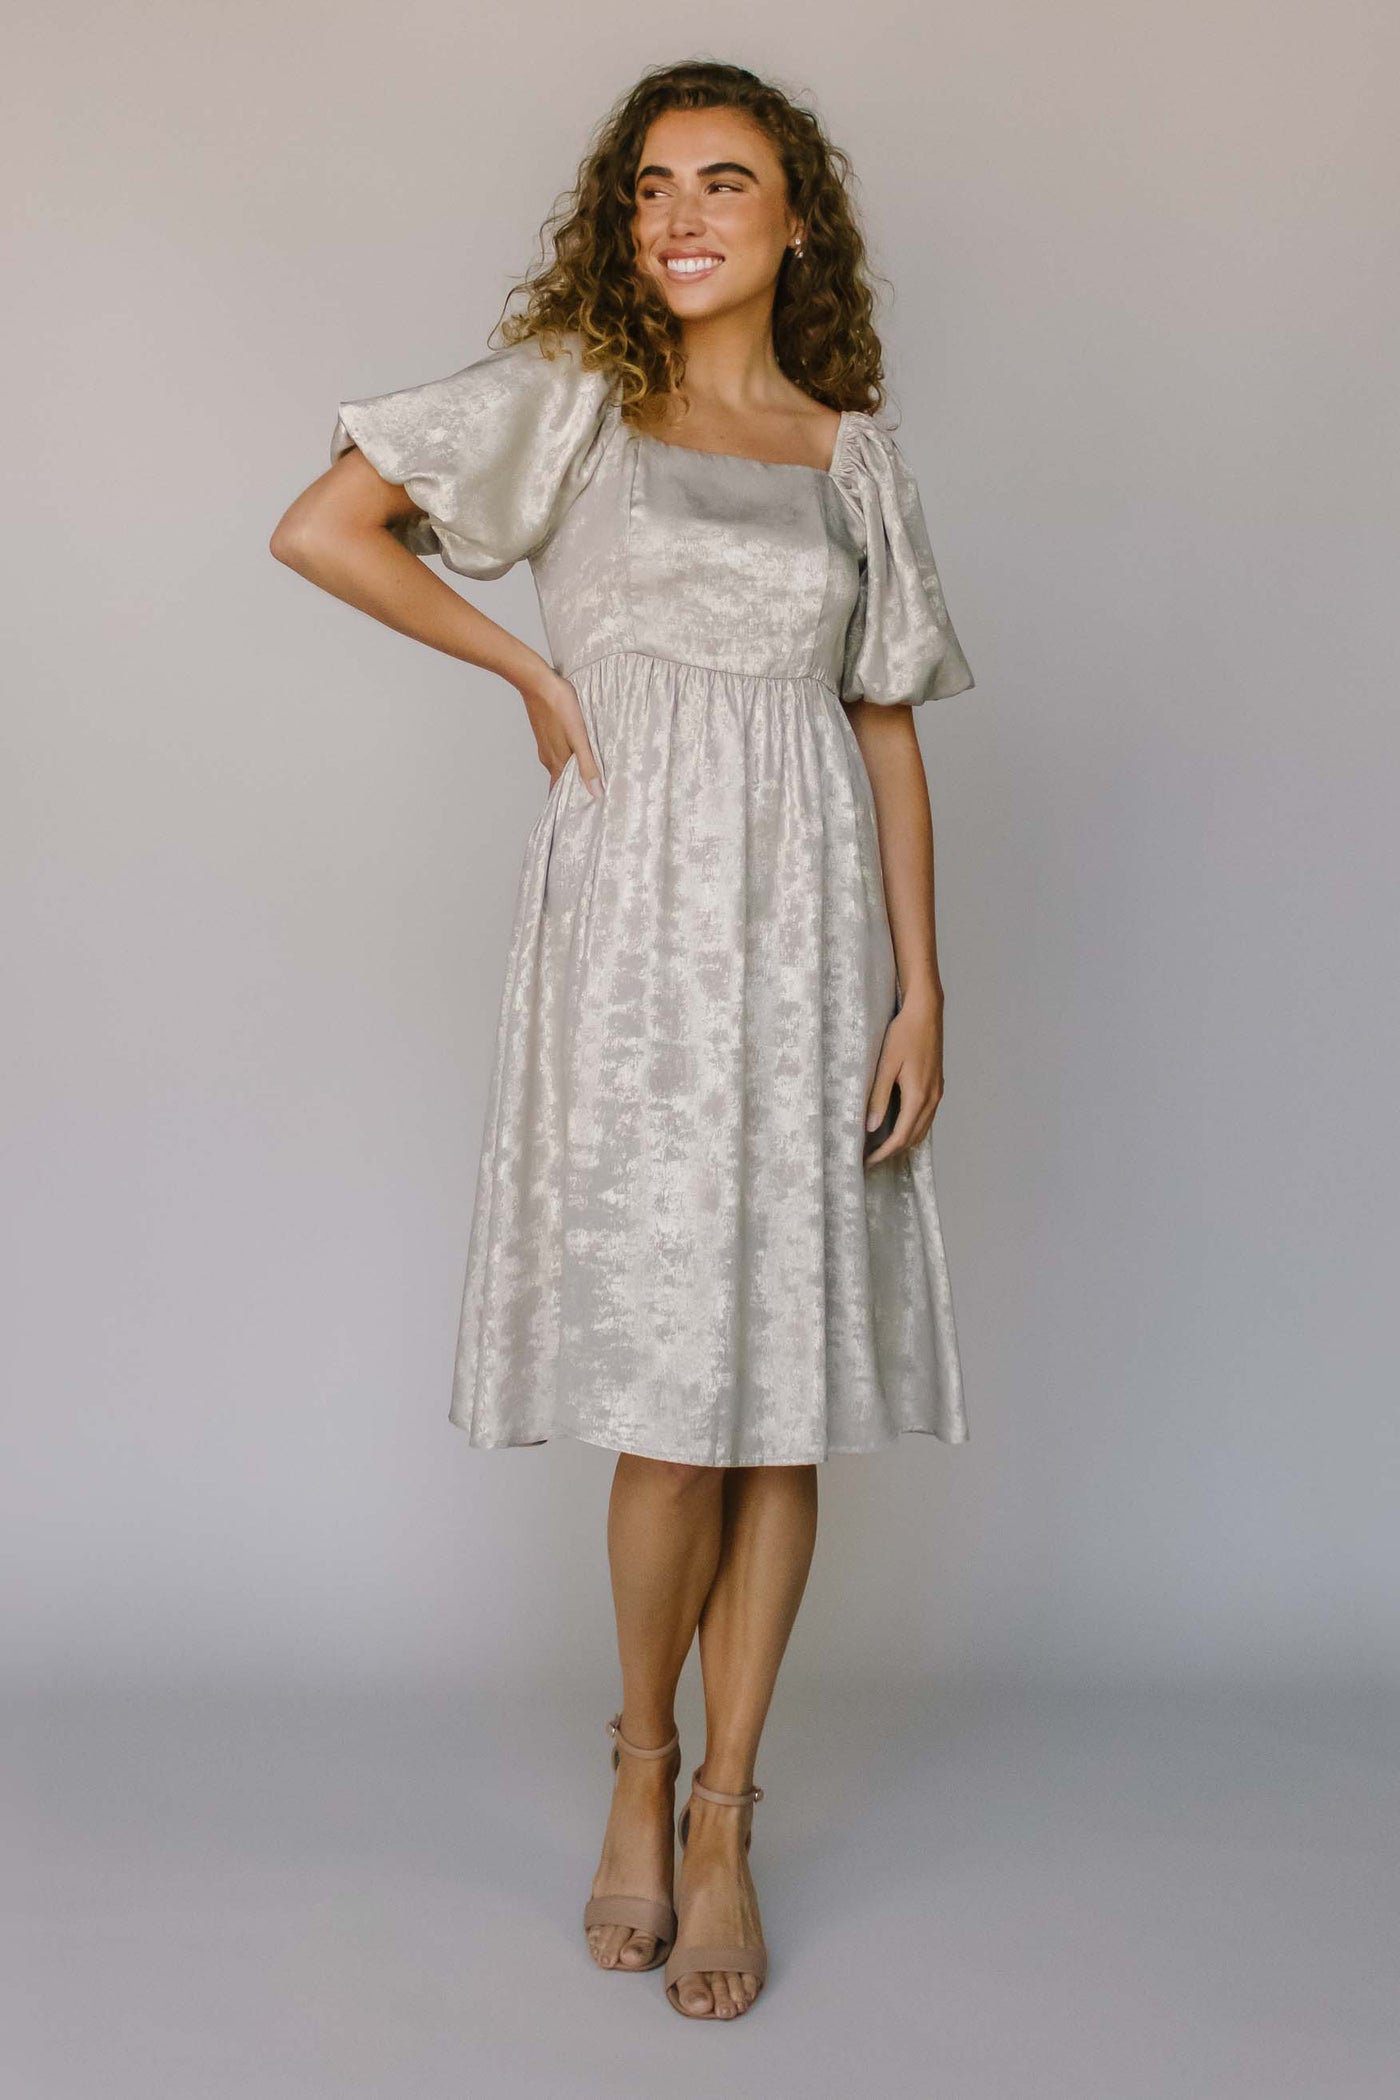 A modest dress in a shimmery champagne color with puff sleeves, a defined waistline, and a stunning square neckline.